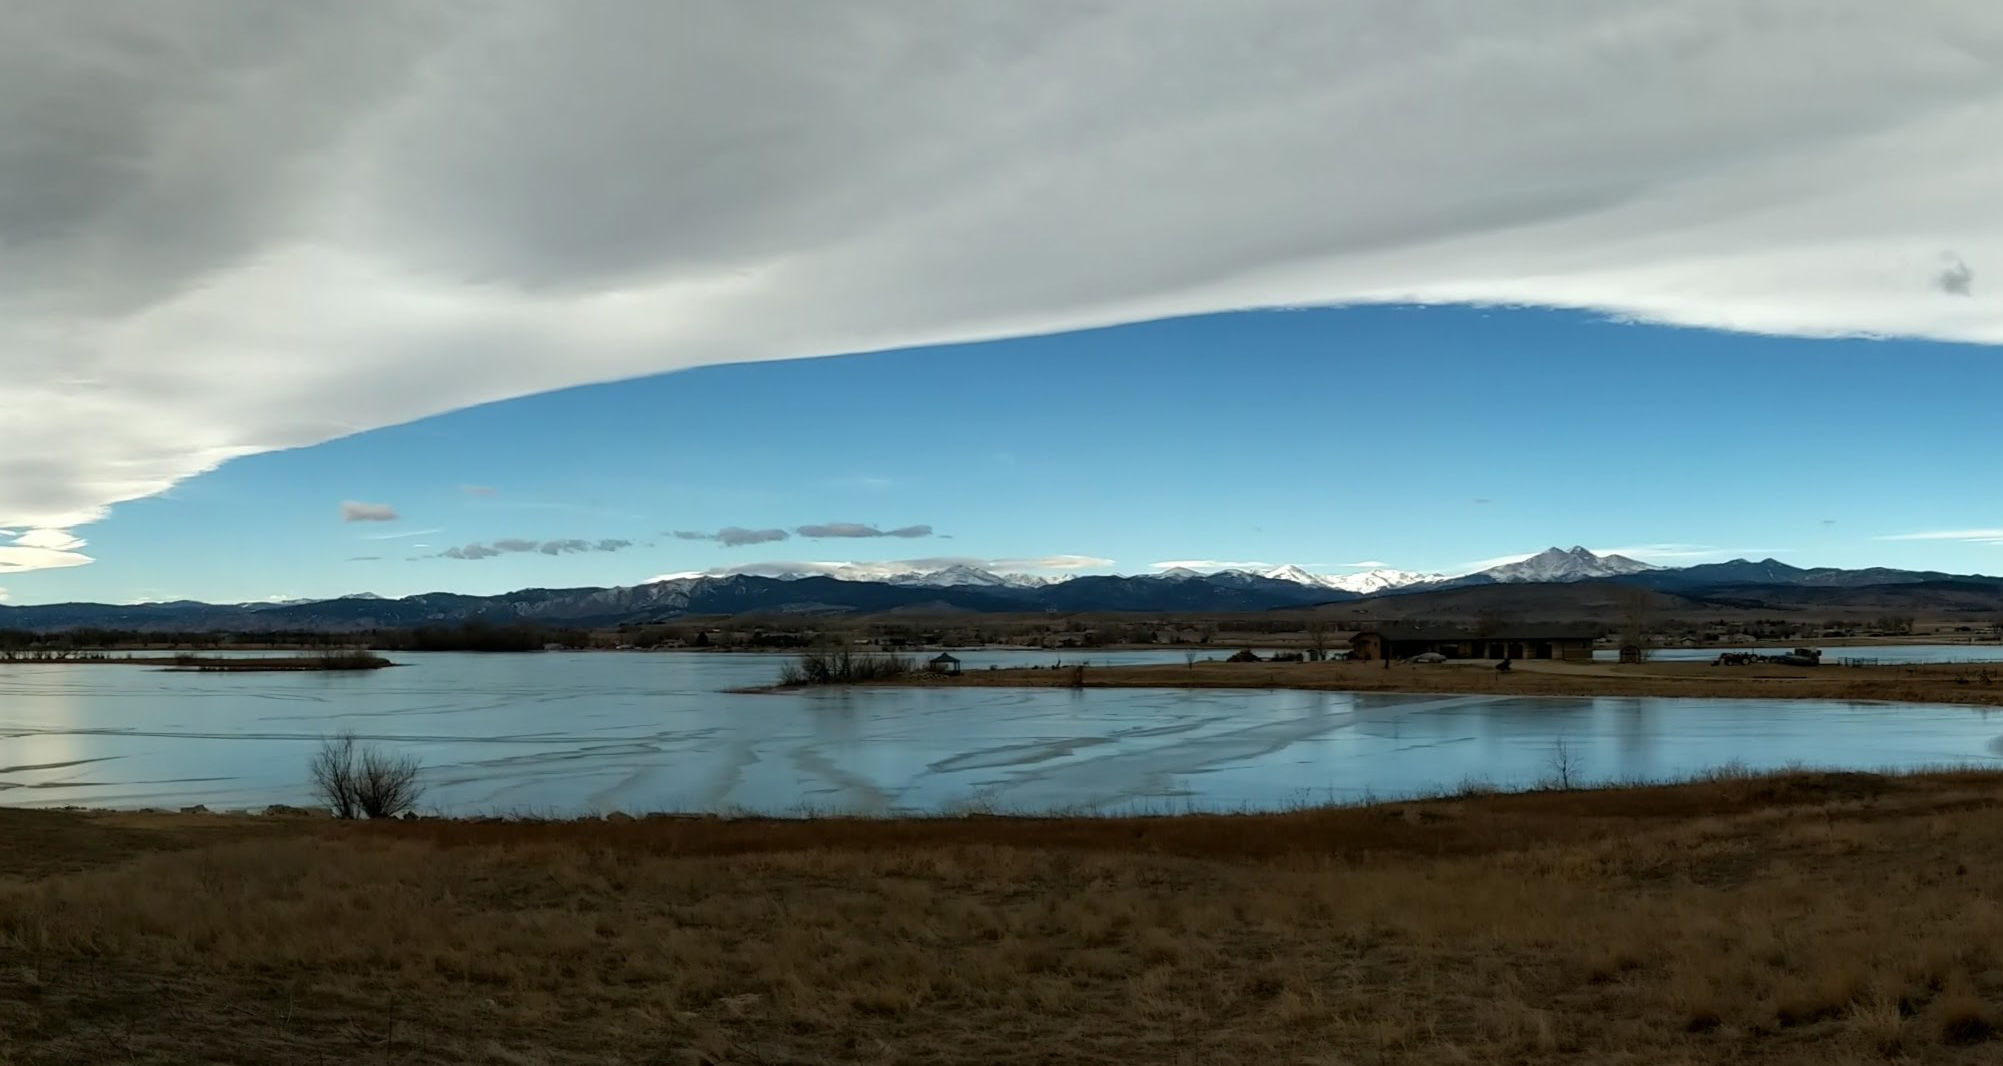 A Chinook Arch, a meteorological phenomenon where rising air over mountains forms a linear cloud edge, can be commonly seen in Colorado. Credit: Phil Plait